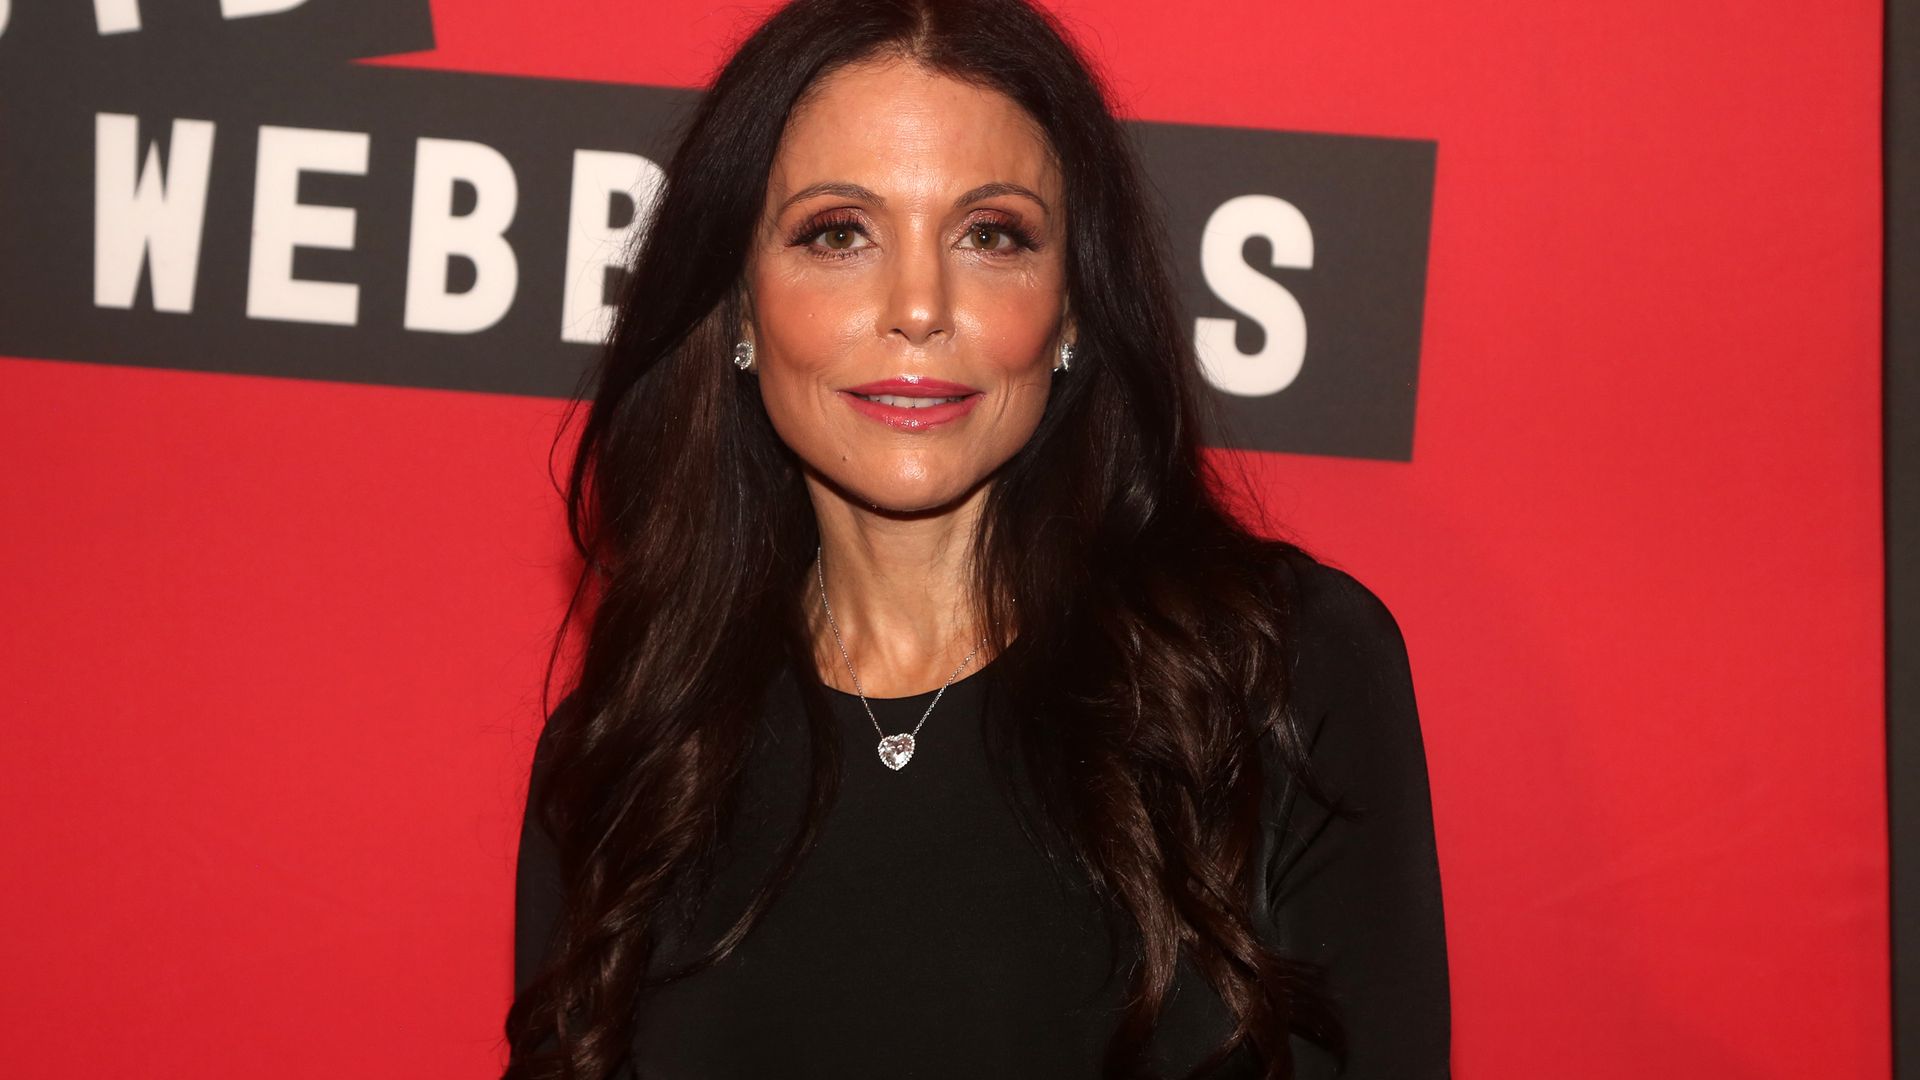 The only thing Bethenny likes to spend her money on is fragrance